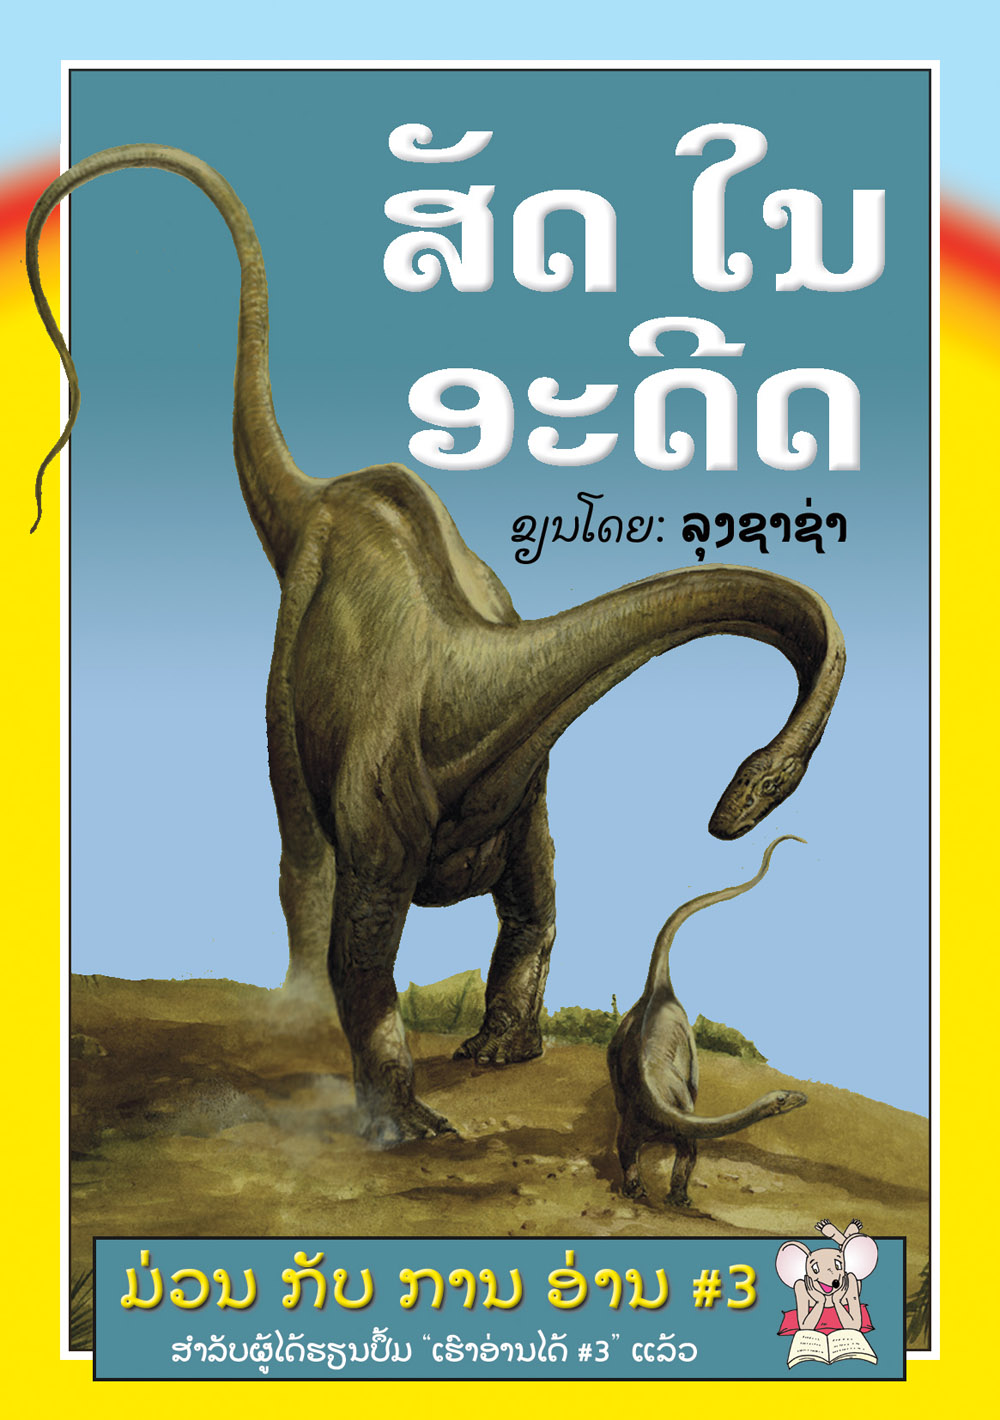 Animals of the Past large book cover, published in Lao language